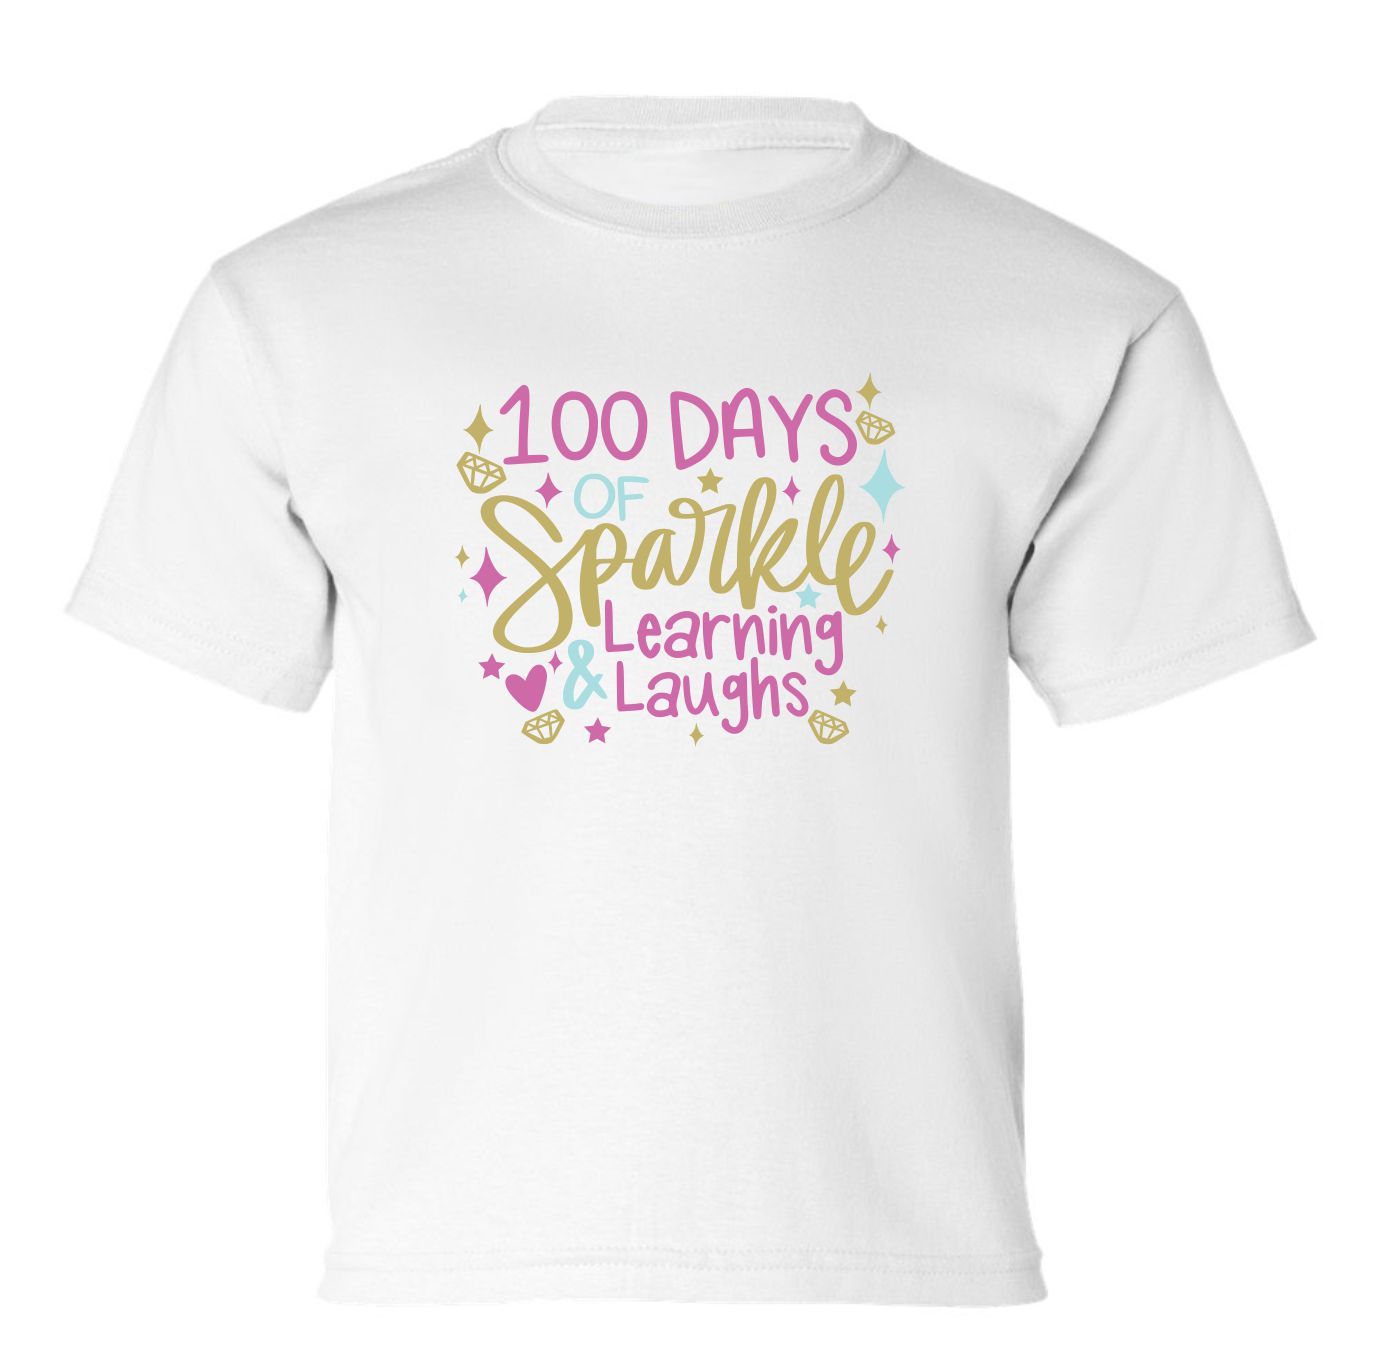 "100 Days of Sparkle" (learning & laughs) Toddler/Youth T-Shirt